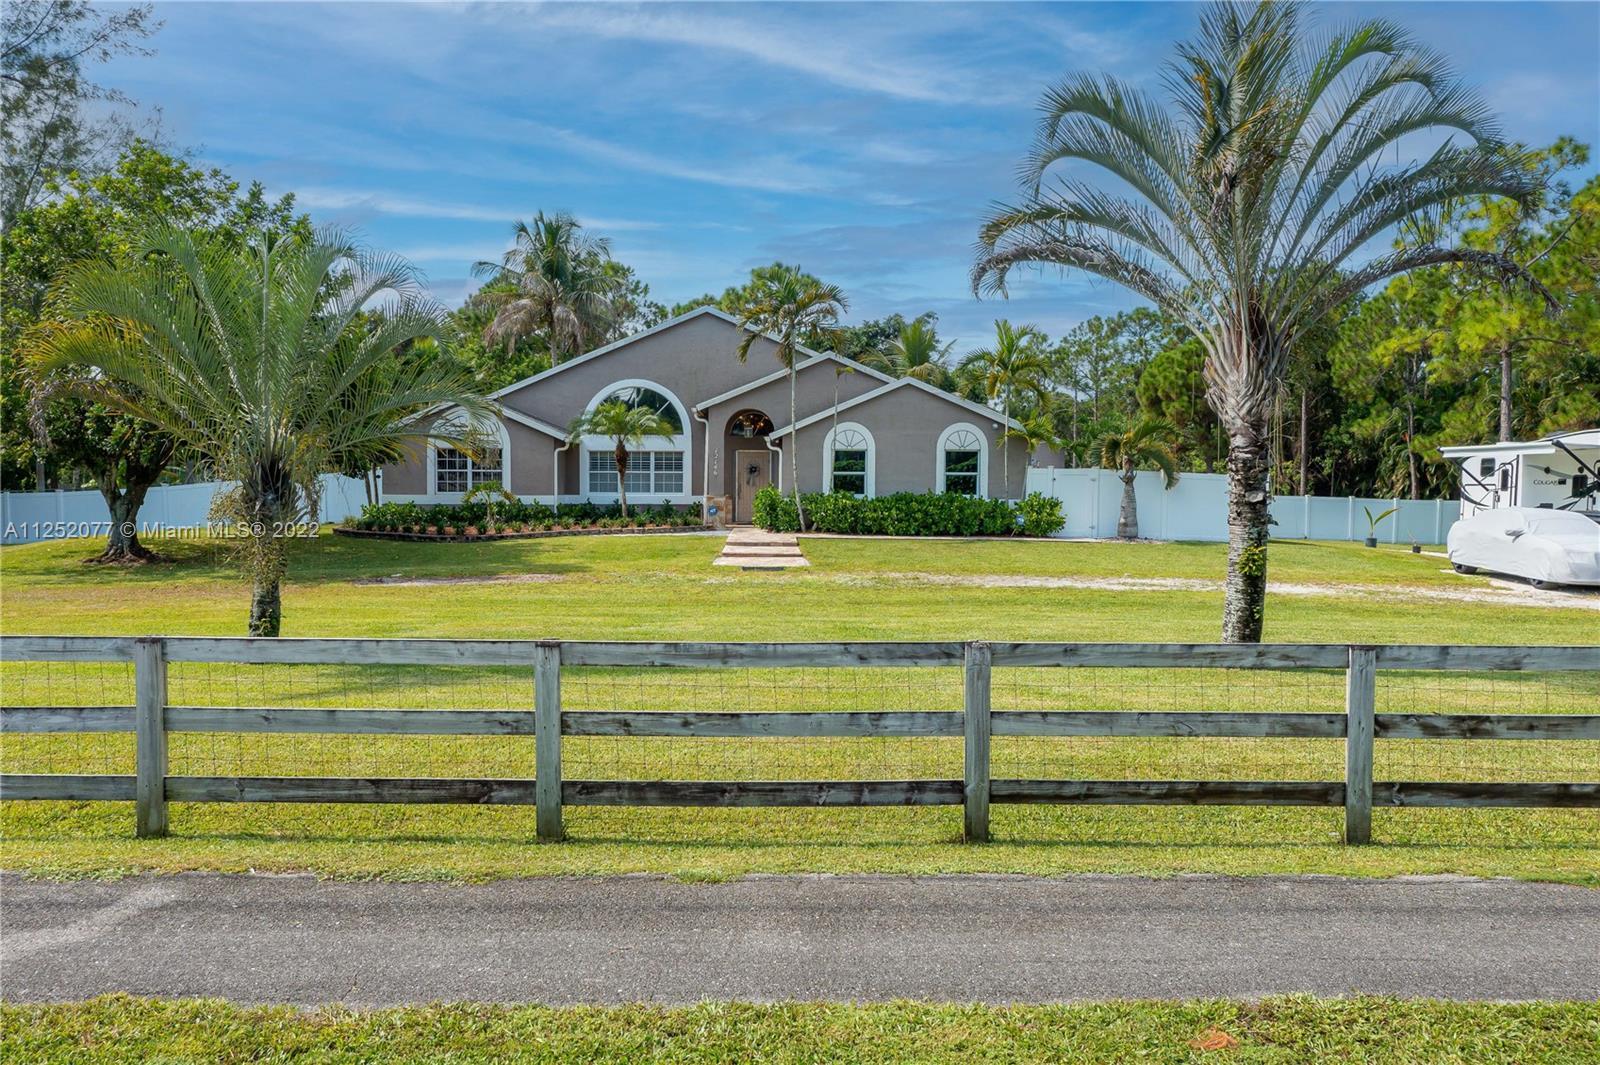 HUGE PRICE REDUCTION! Acreage Oasis, 4 Bed/2 bath + Den on a 1.64 Acre lot has ample room for everyo